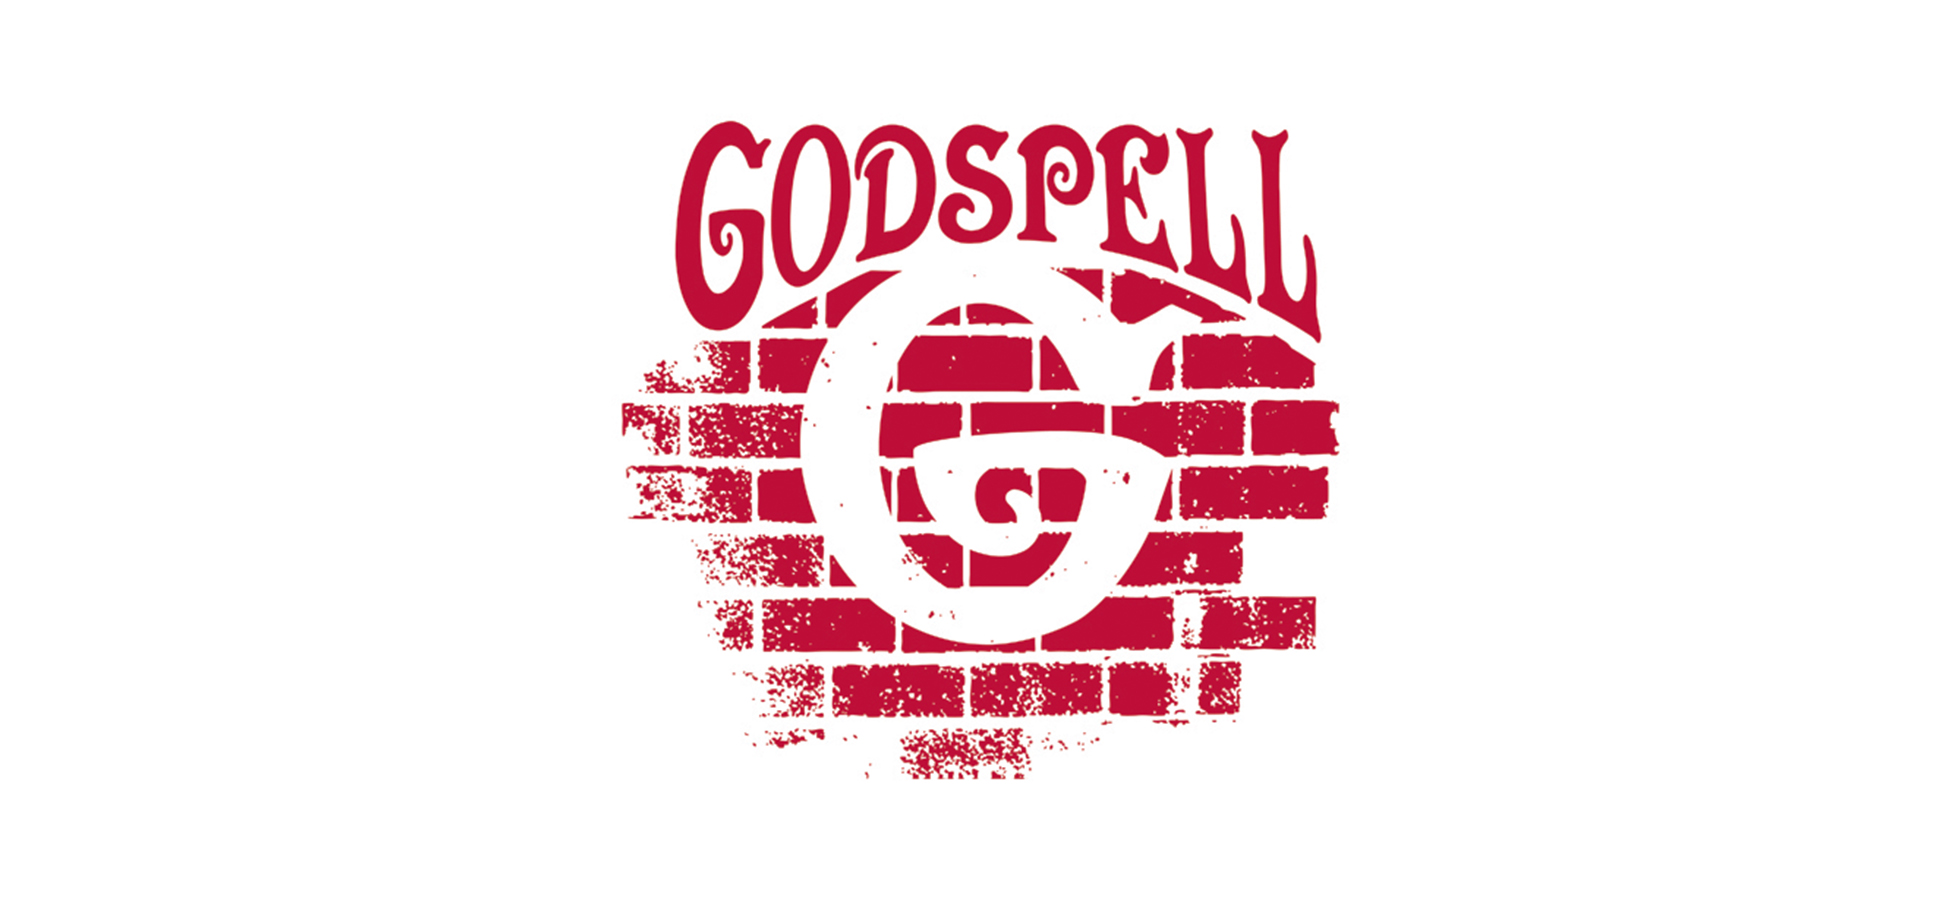 Logo for the Boradway musical, Godspell to be presented by Assumption College in February 2020.